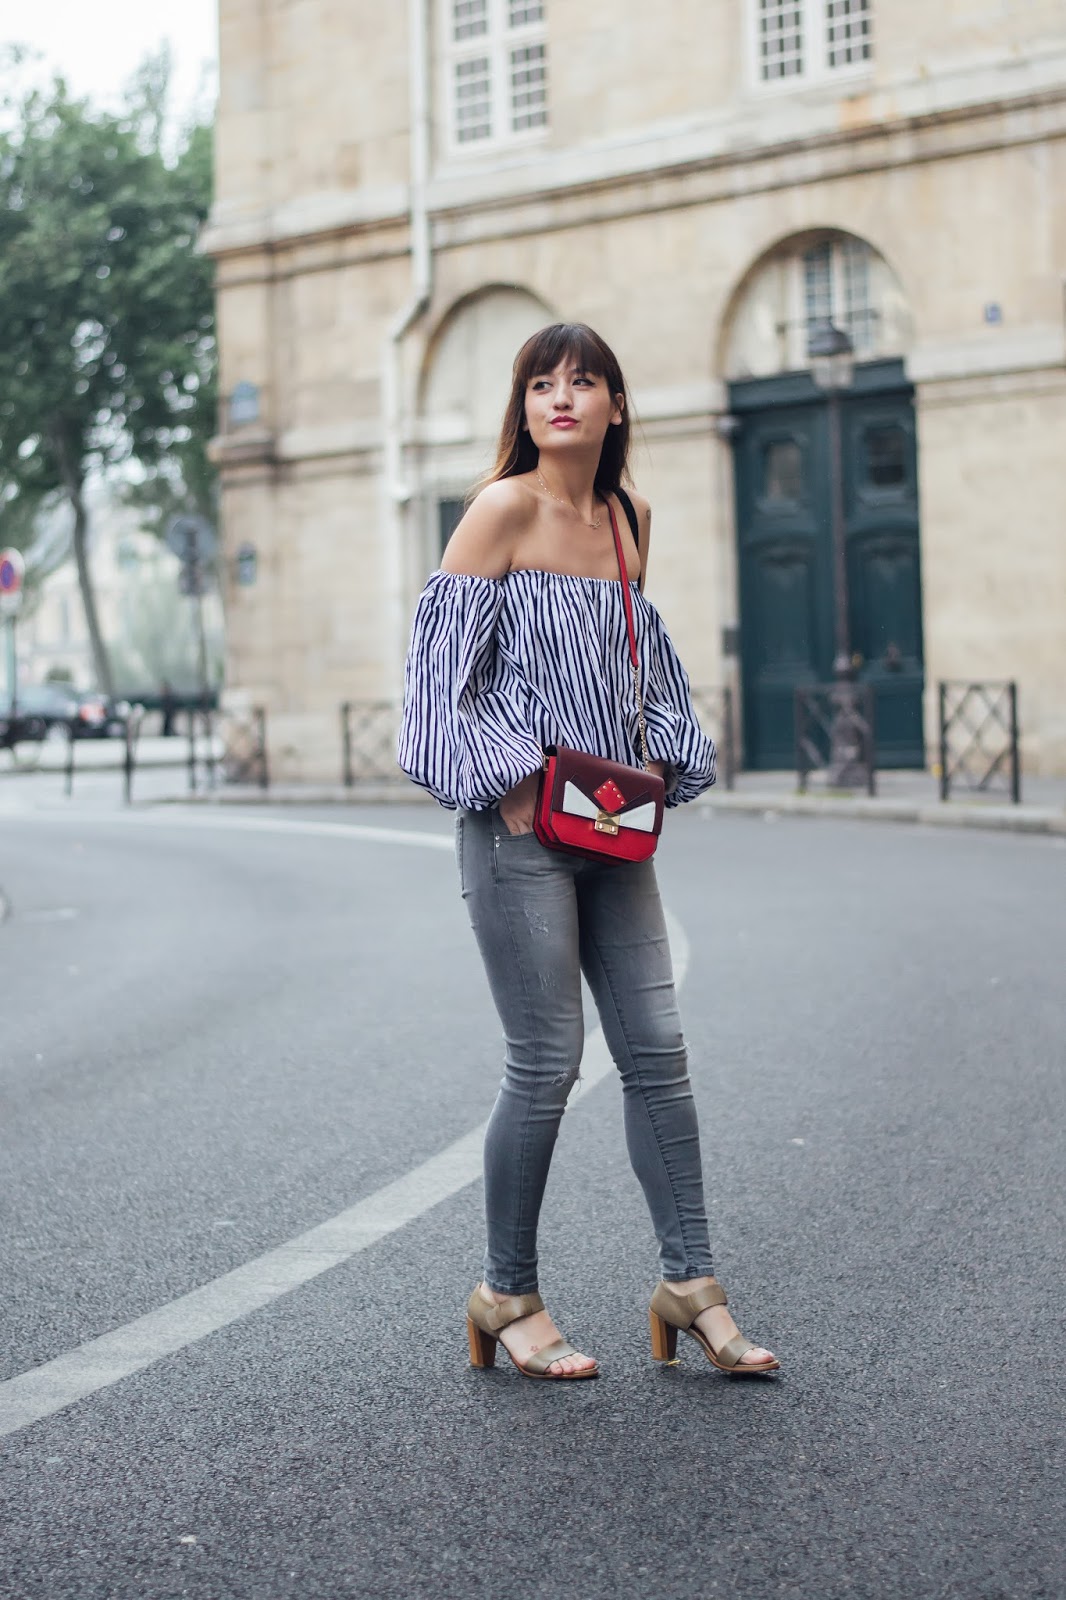 parisian fashion blogger, chic parisian style, look of the day, outfit inspiration, meet me in paree, spring style